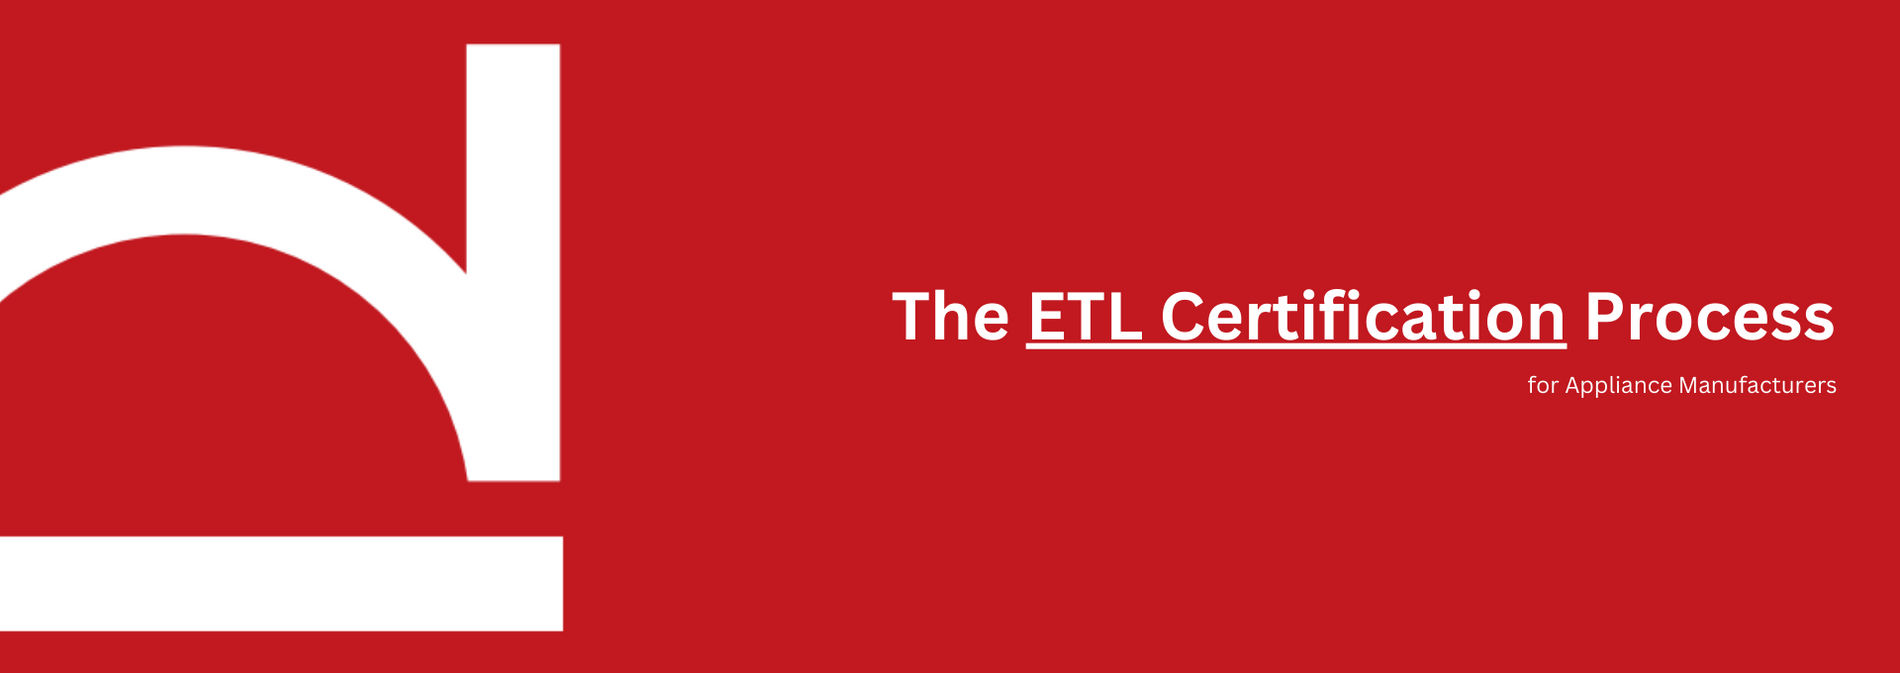 The ETL Certification Process for Appliance Manufacturers